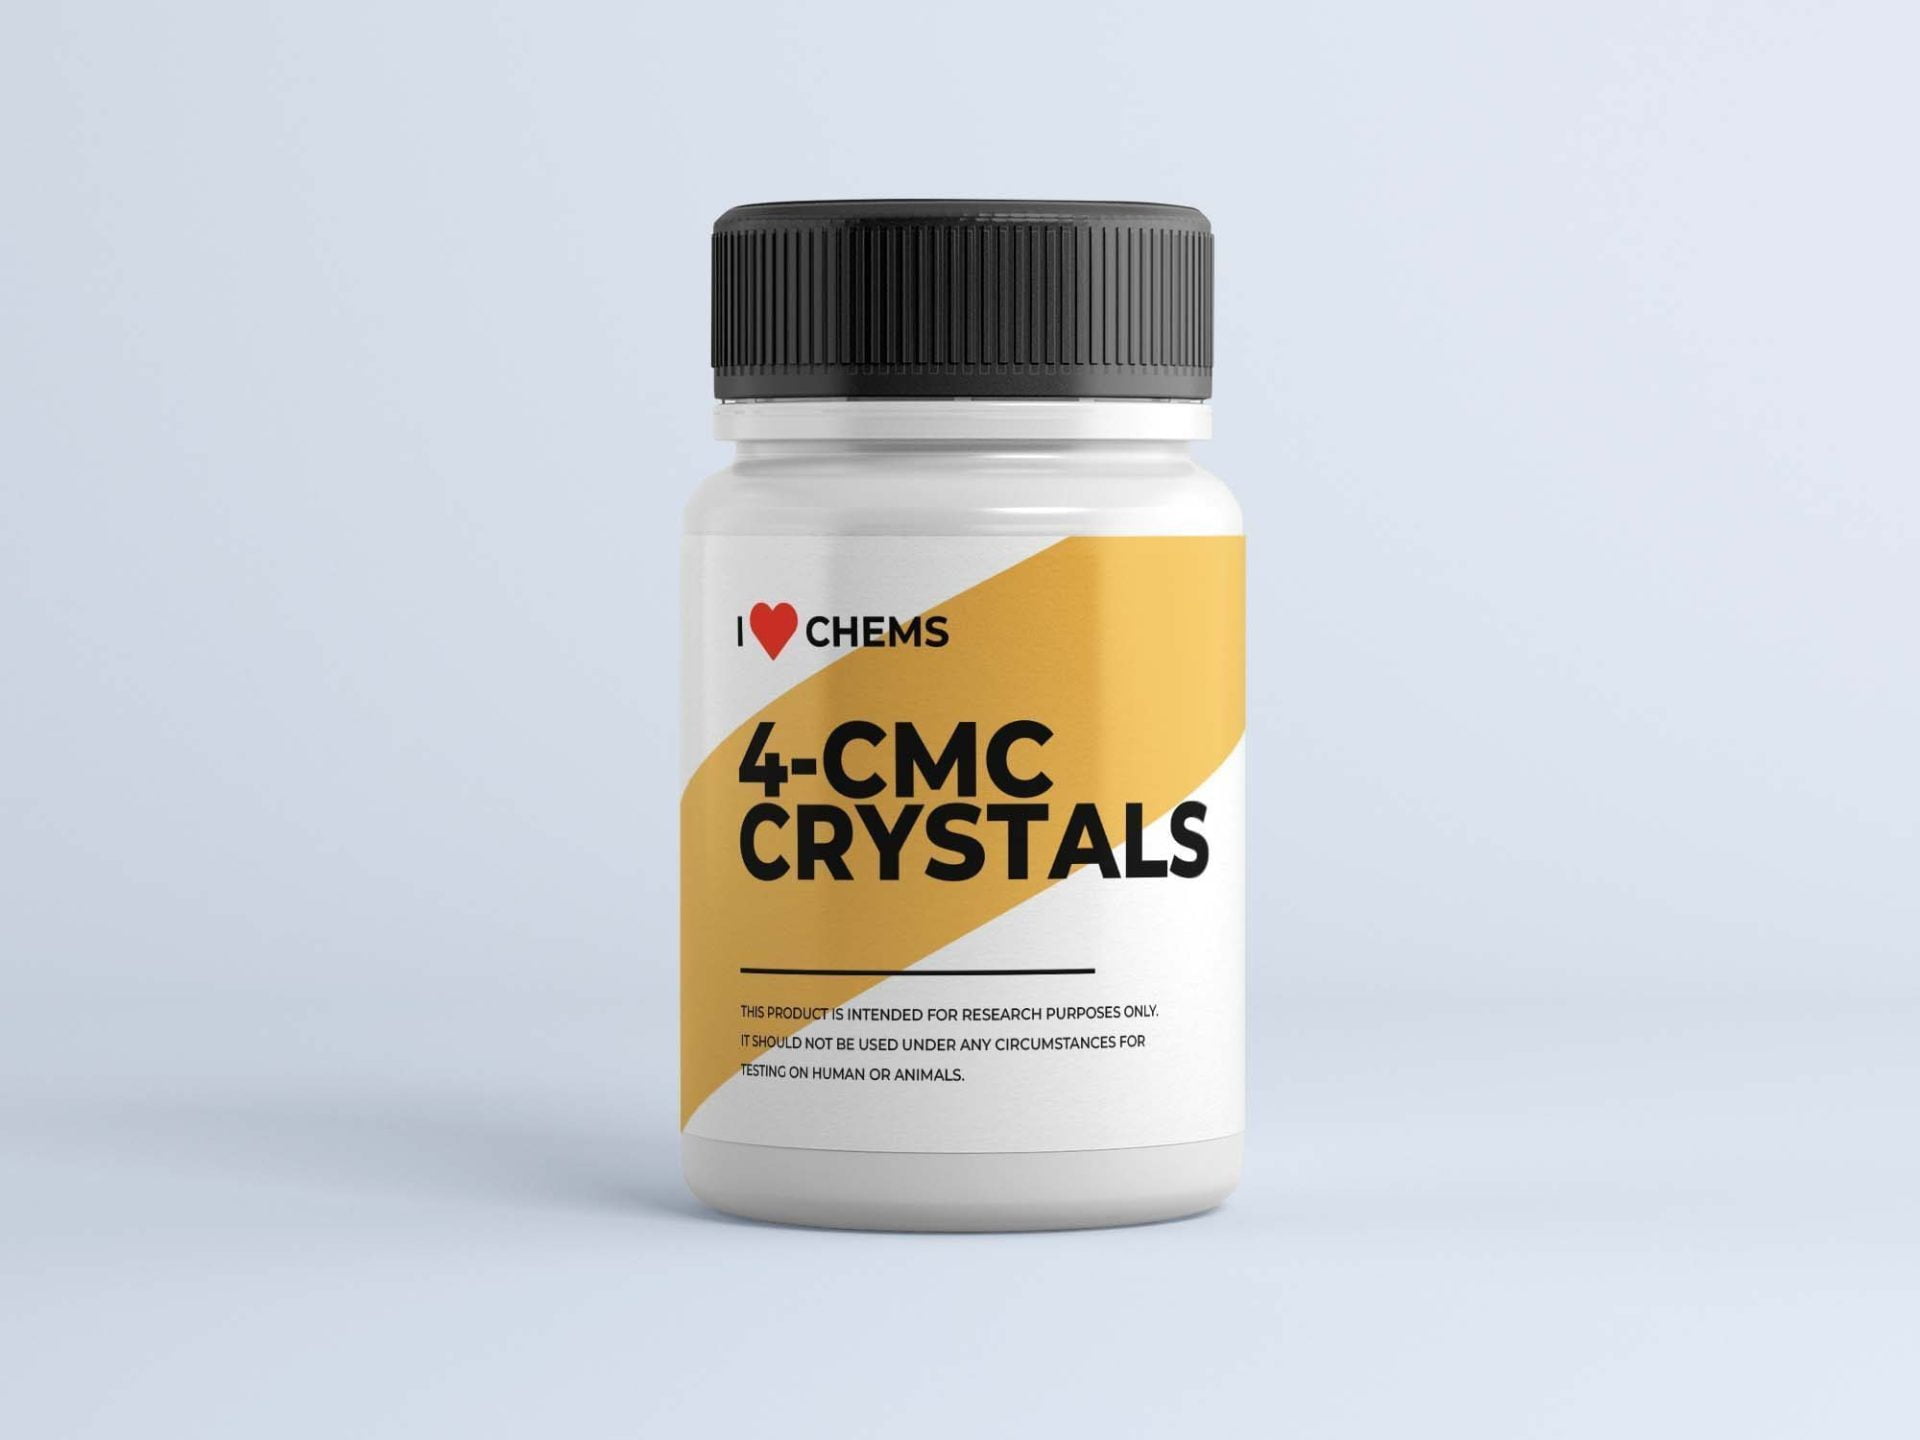 ilovechems rc 4cmc crystals-ilovechems